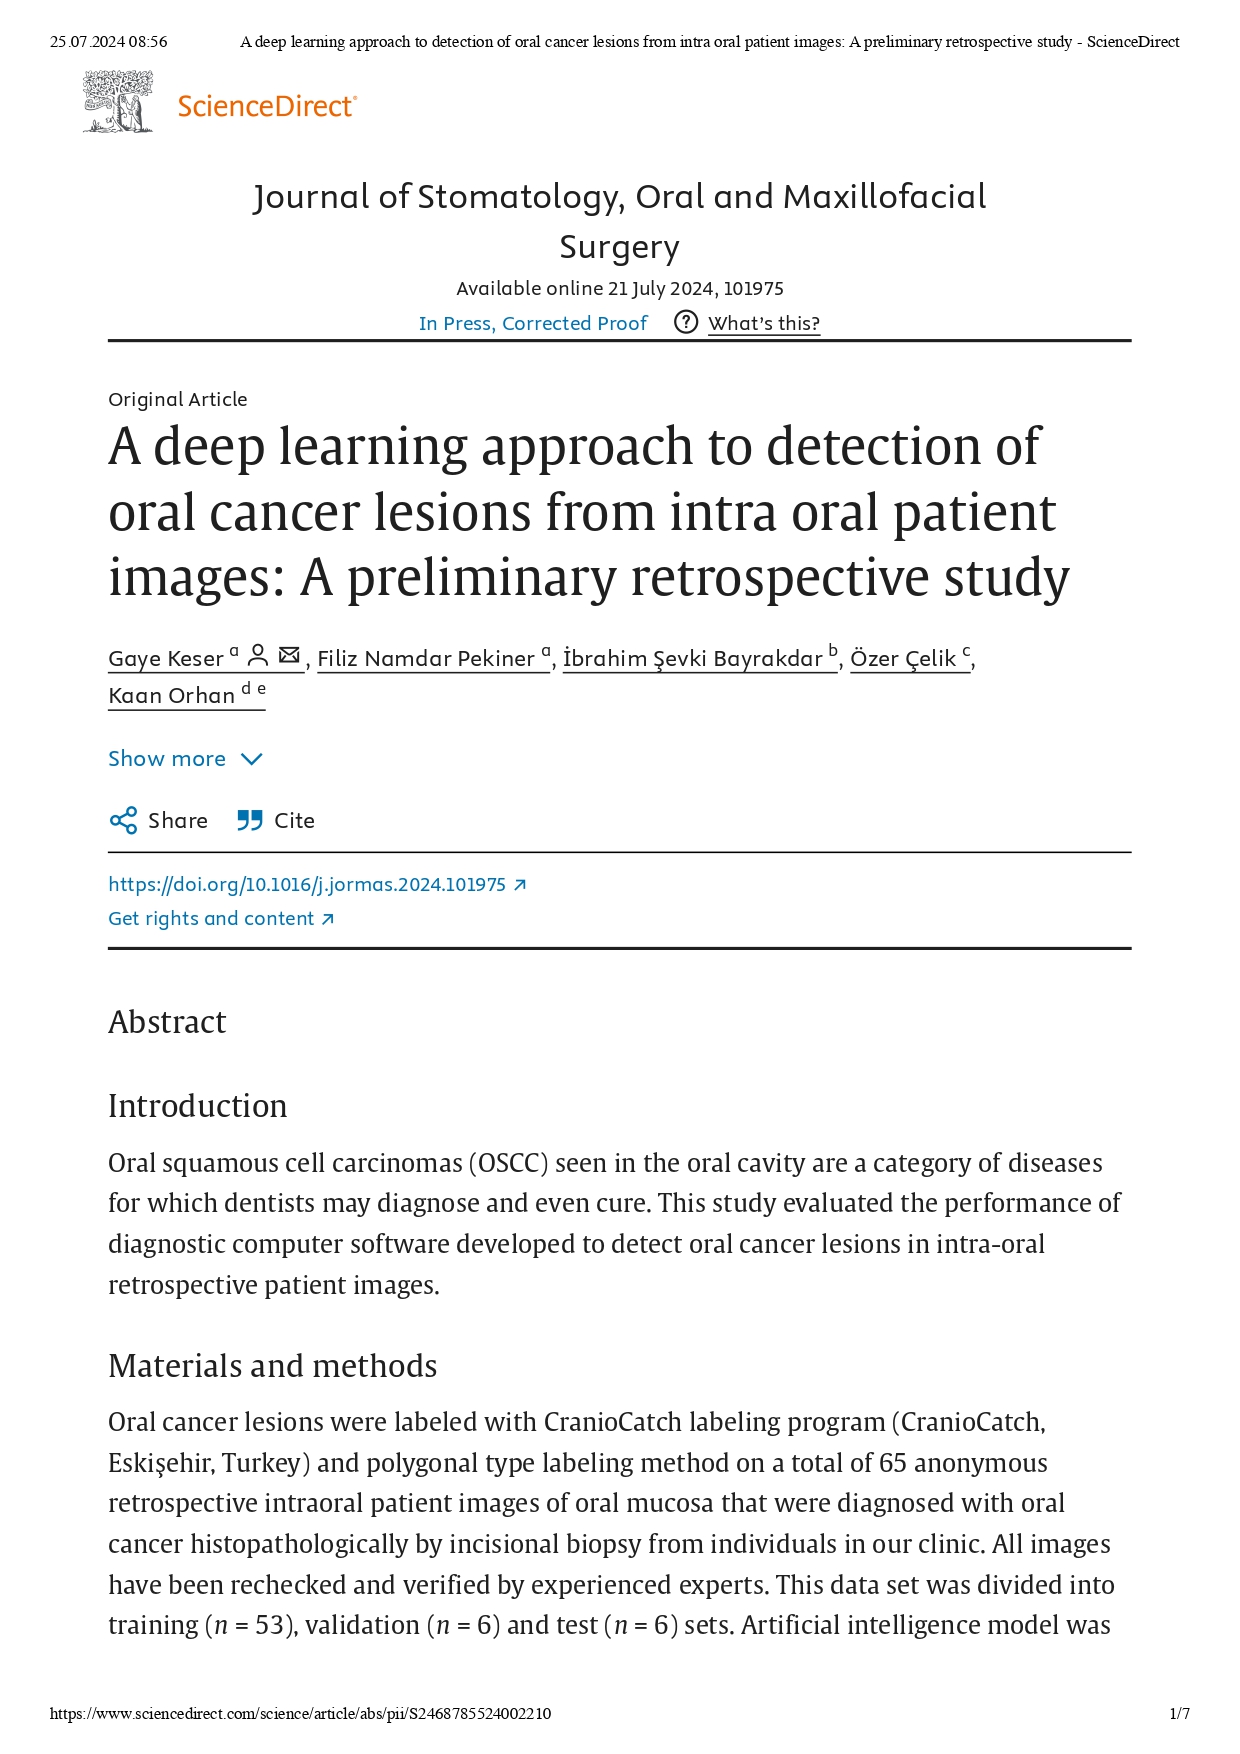 A Deep Learning Approach To Detection Of Oral Cancer Lesions From Intra Oral Patient Images: A Preliminary Retrospective Study